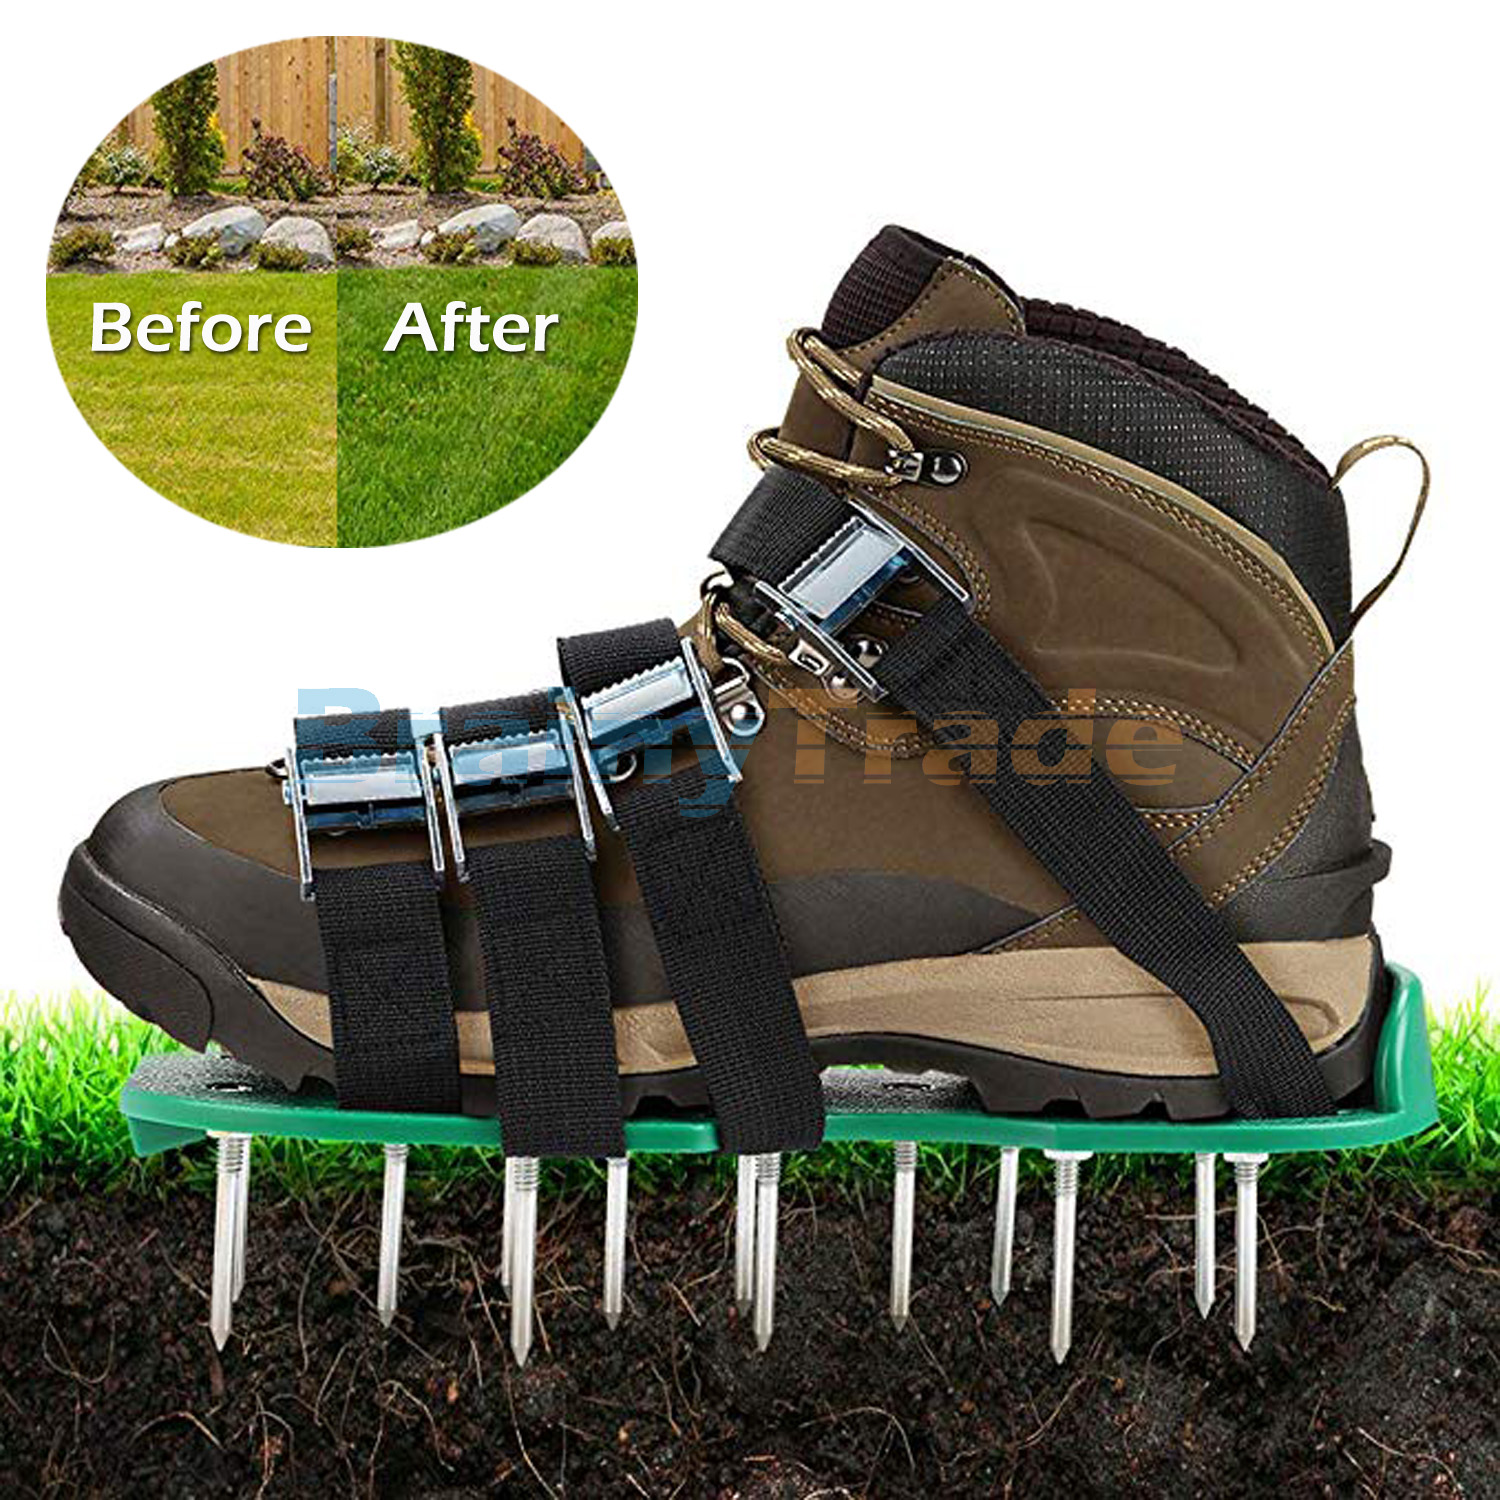 Lawn Aerator Shoes Lawn Spikes Shoes 4 Adjustable Straps Garden Aerating Tool Ebay,Two Player Card Games For Couples